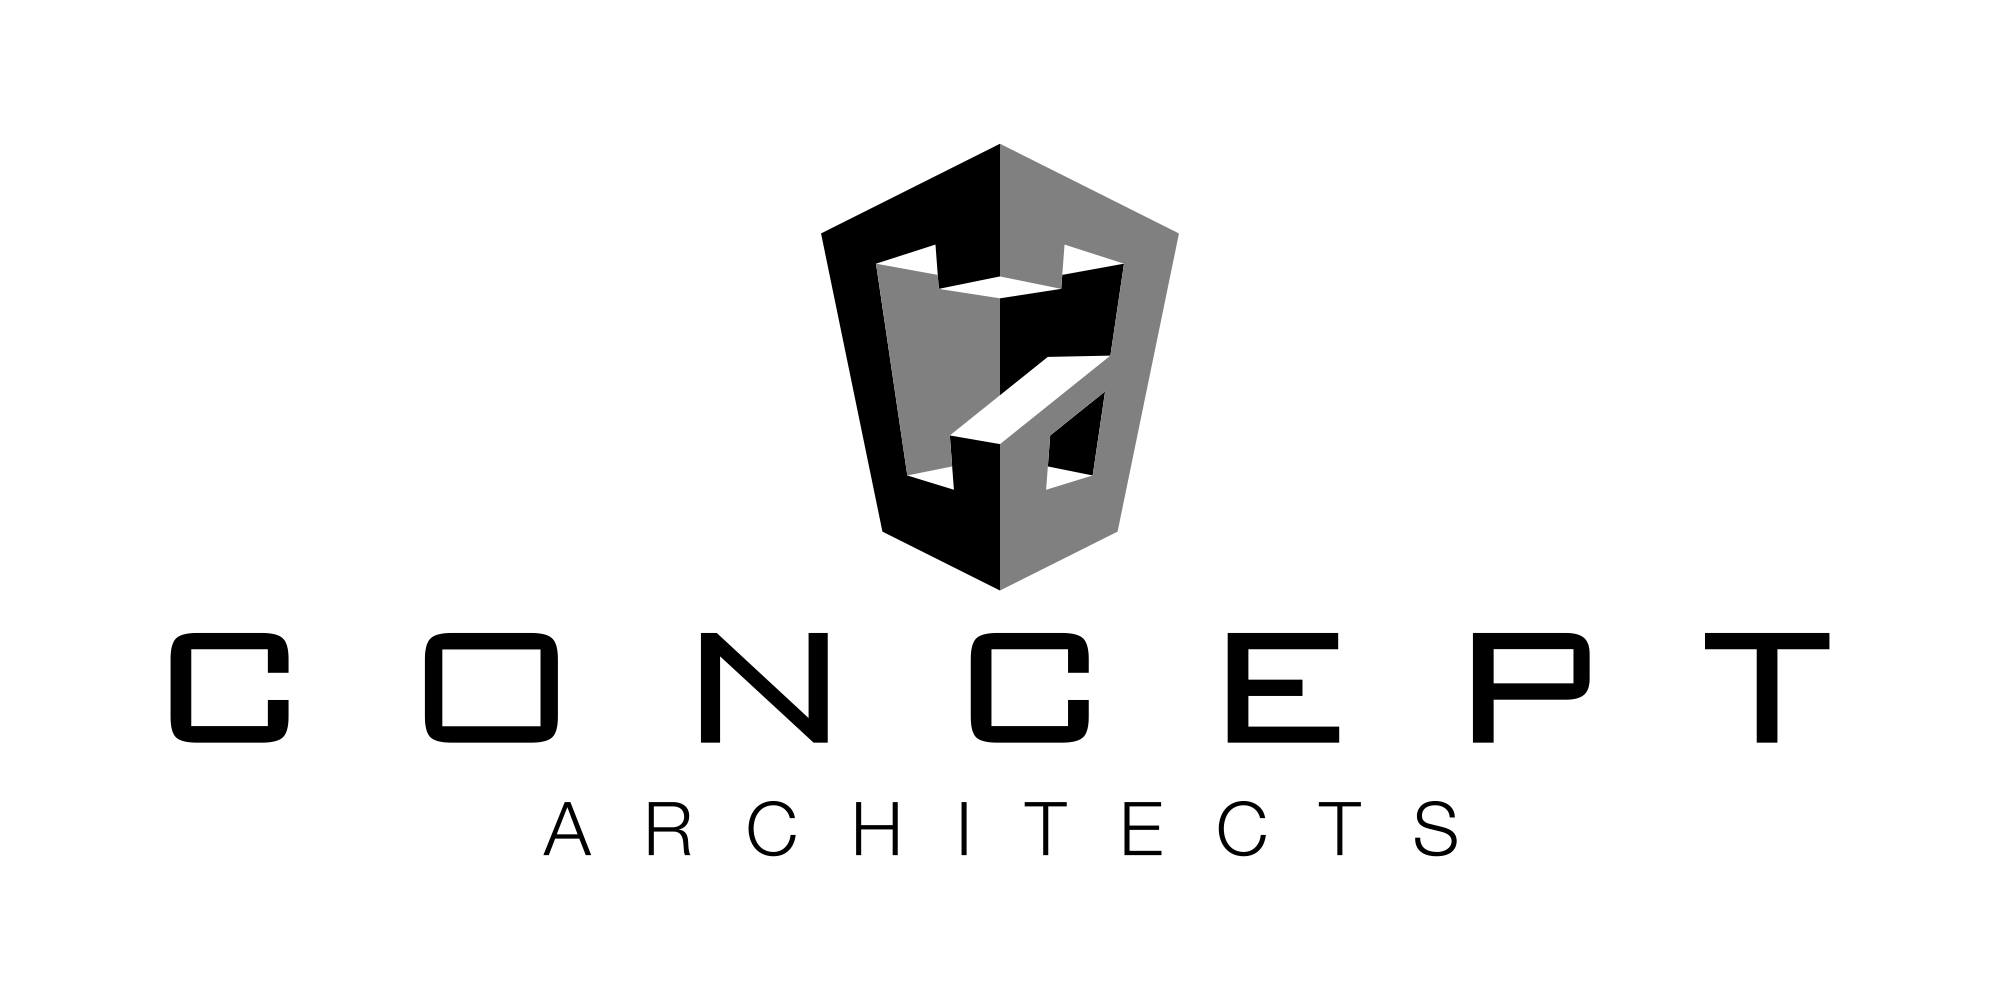 Architects Logo - Concept Architects – Architects in Louisville KY